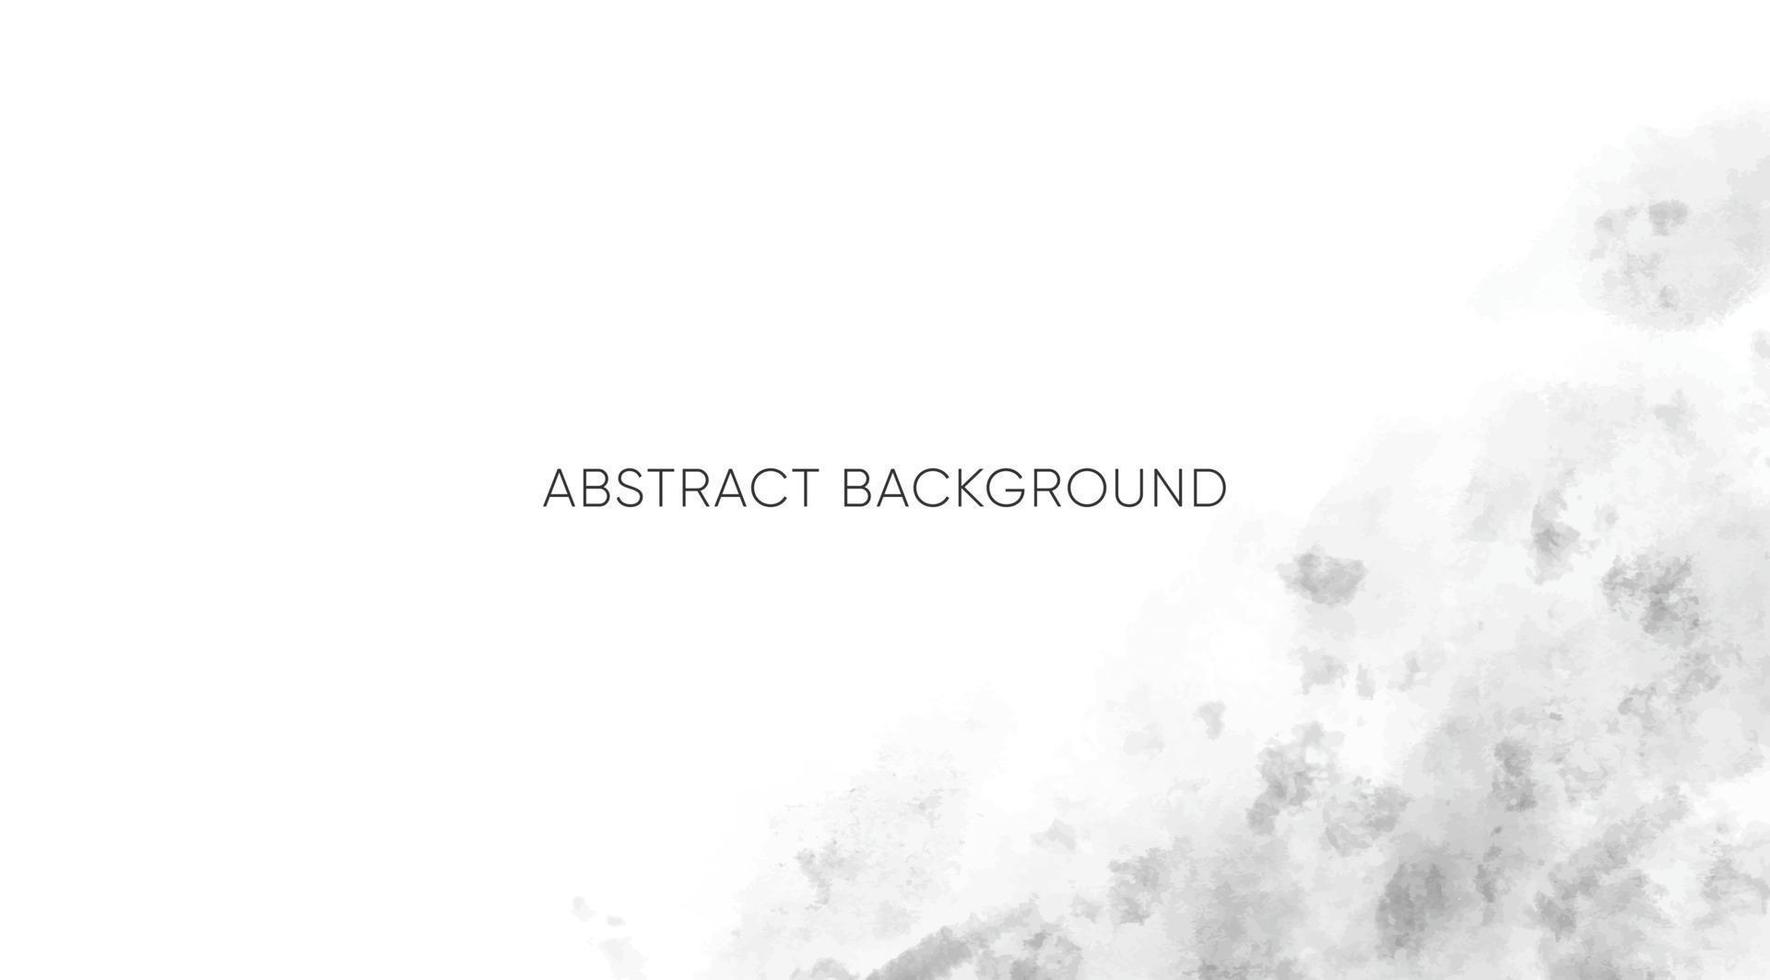 Abstract horizontal watercolor background vector